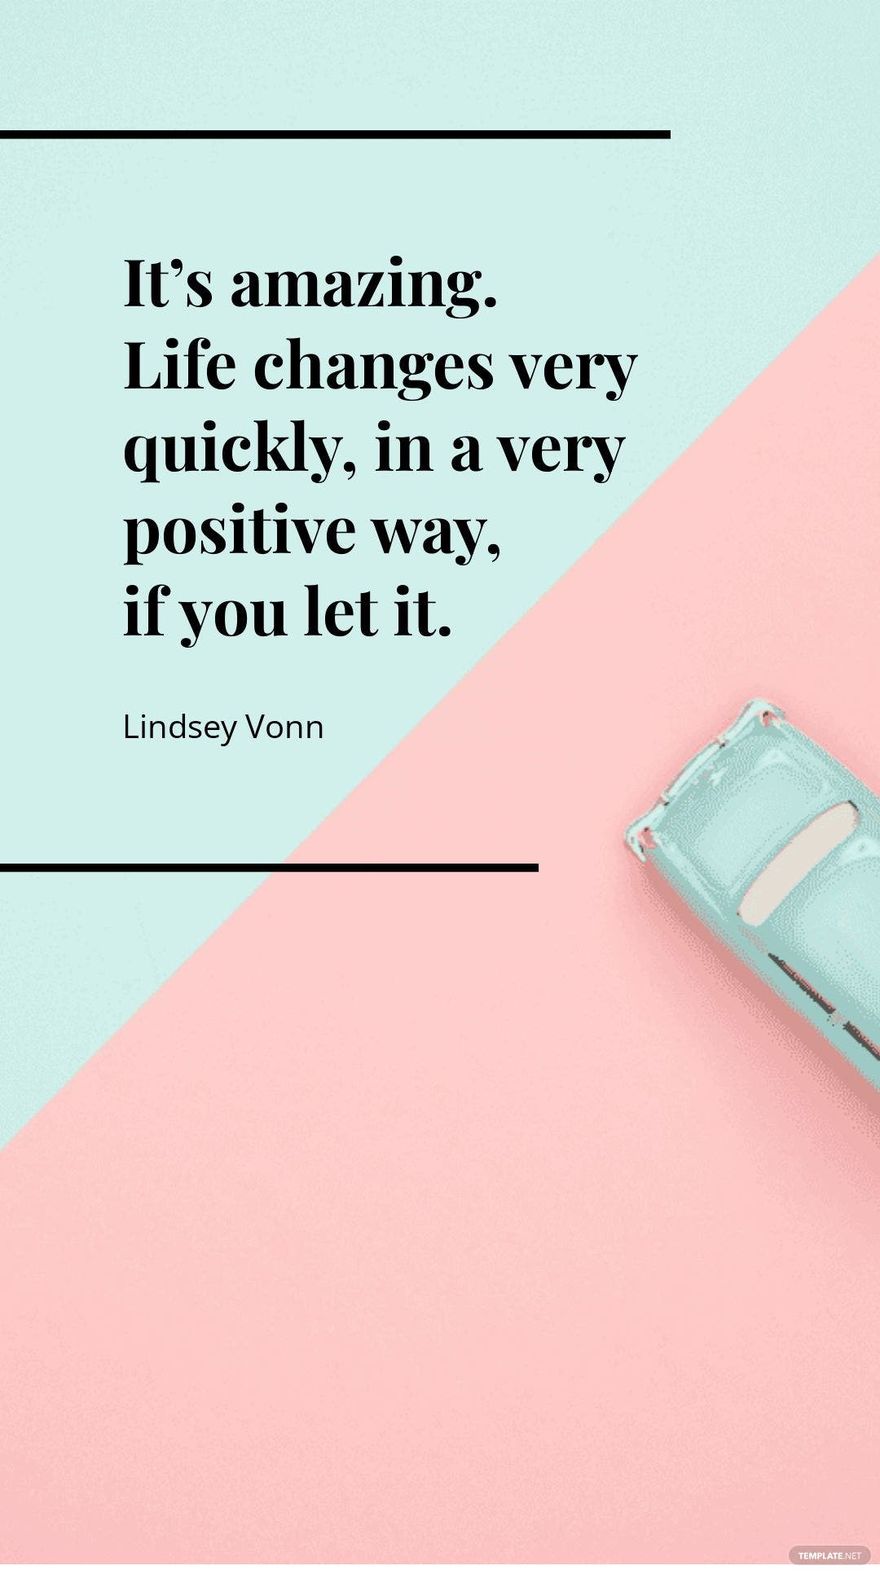 Lindsey Vonn - It’s amazing. Life changes very quickly, in a very positive way, if you let it.